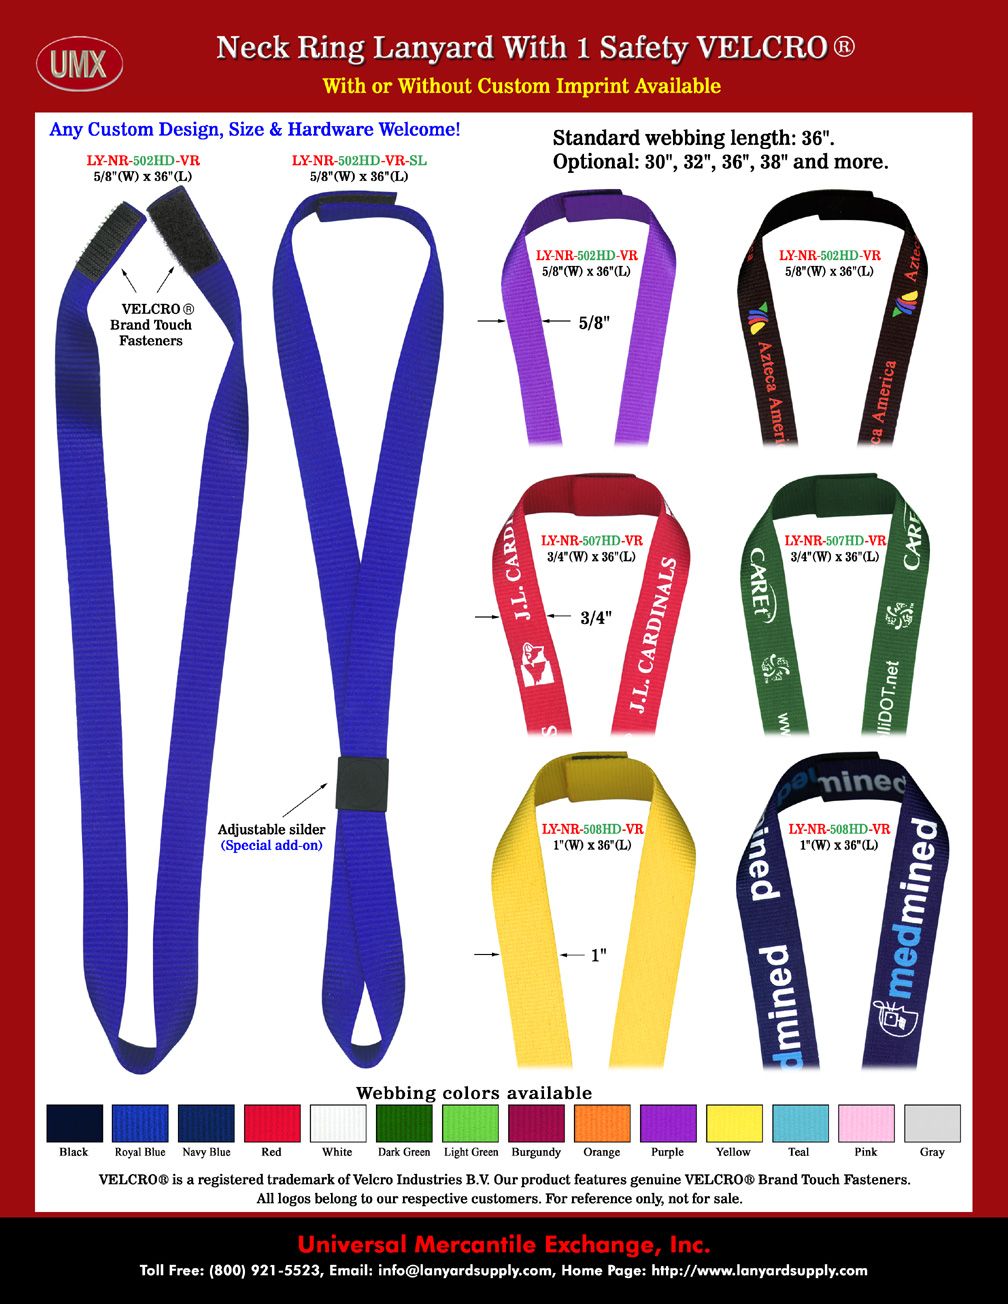 3/8", 5/8", 3/4" and 1" buckle safety neck rings, neck straps or neck band alnayrds come with 14 colors, black, white, royal blue, navy blue, yellow, red, orange, pink, burgundy, light green, dark green, purple, teal and grey color available.